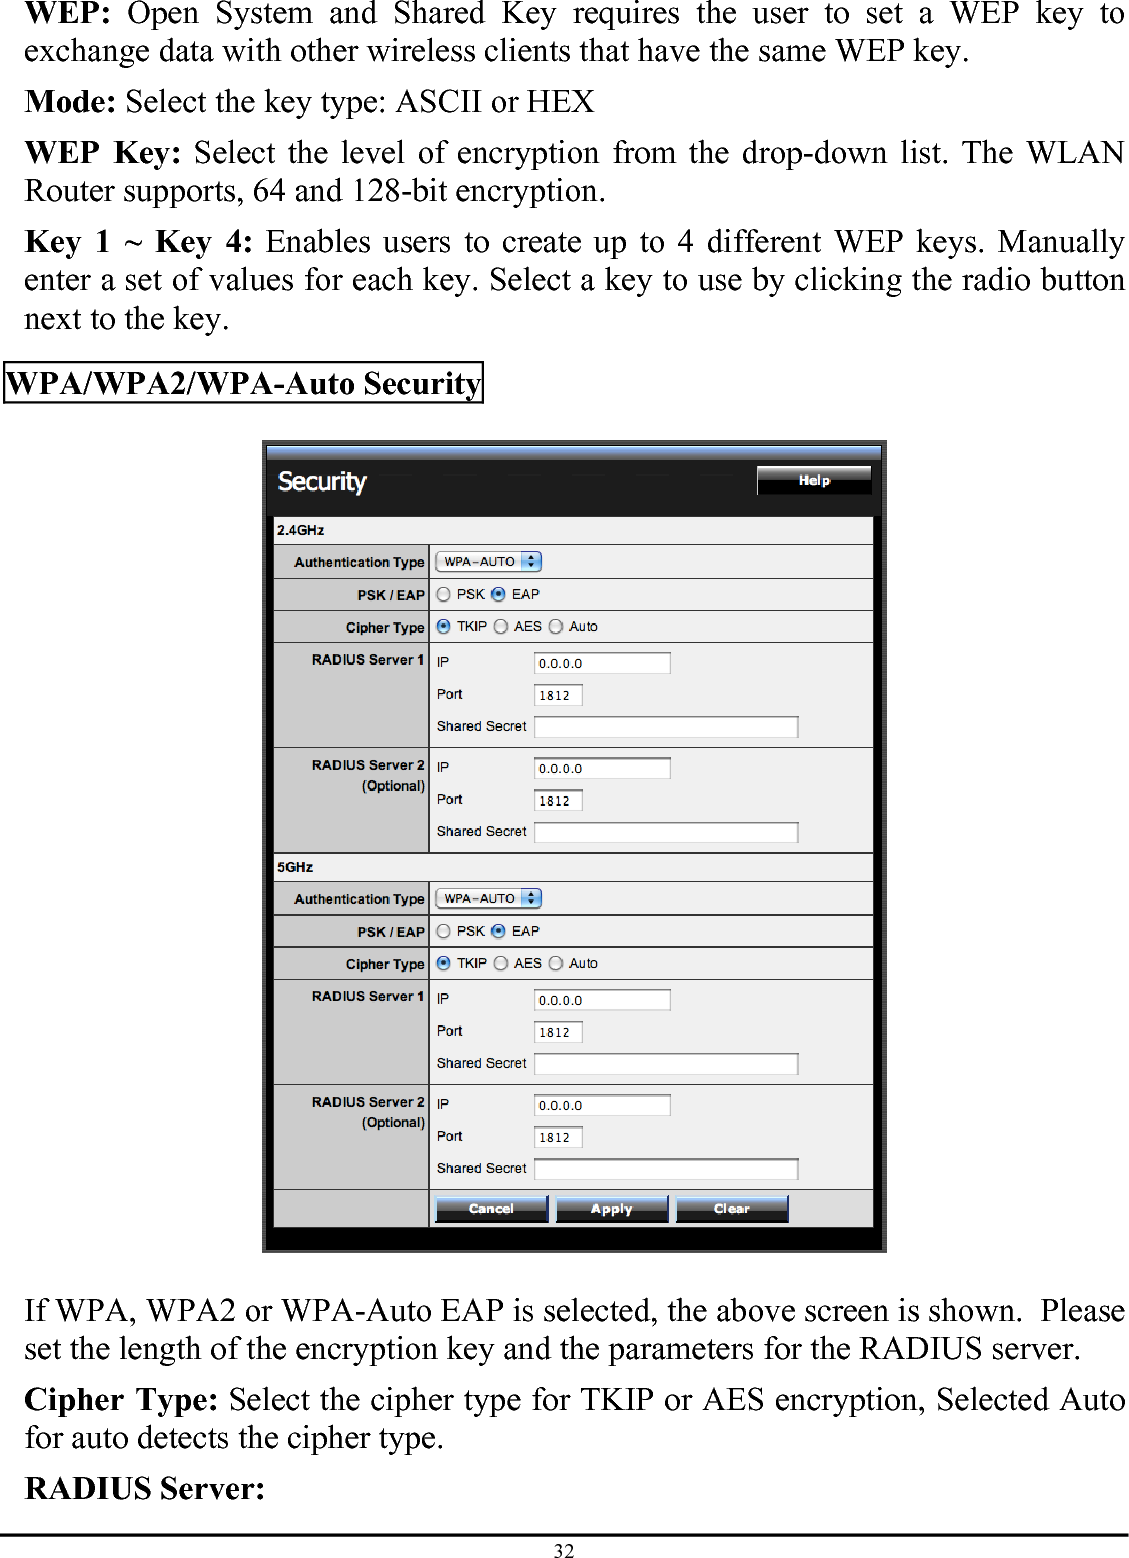 32 WEP: Open System and Shared Key requires the user to set a WEP key to exchange data with other wireless clients that have the same WEP key. Mode: Select the key type: ASCII or HEX WEP Key: Select the level of encryption from the drop-down list. The WLAN Router supports, 64 and 128-bit encryption. Key 1 ~ Key 4: Enables users to create up to 4 different WEP keys. Manually enter a set of values for each key. Select a key to use by clicking the radio button next to the key.  WPA/WPA2/WPA-Auto Security    If WPA, WPA2 or WPA-Auto EAP is selected, the above screen is shown.  Please set the length of the encryption key and the parameters for the RADIUS server. Cipher Type: Select the cipher type for TKIP or AES encryption, Selected Auto for auto detects the cipher type.  RADIUS Server: 